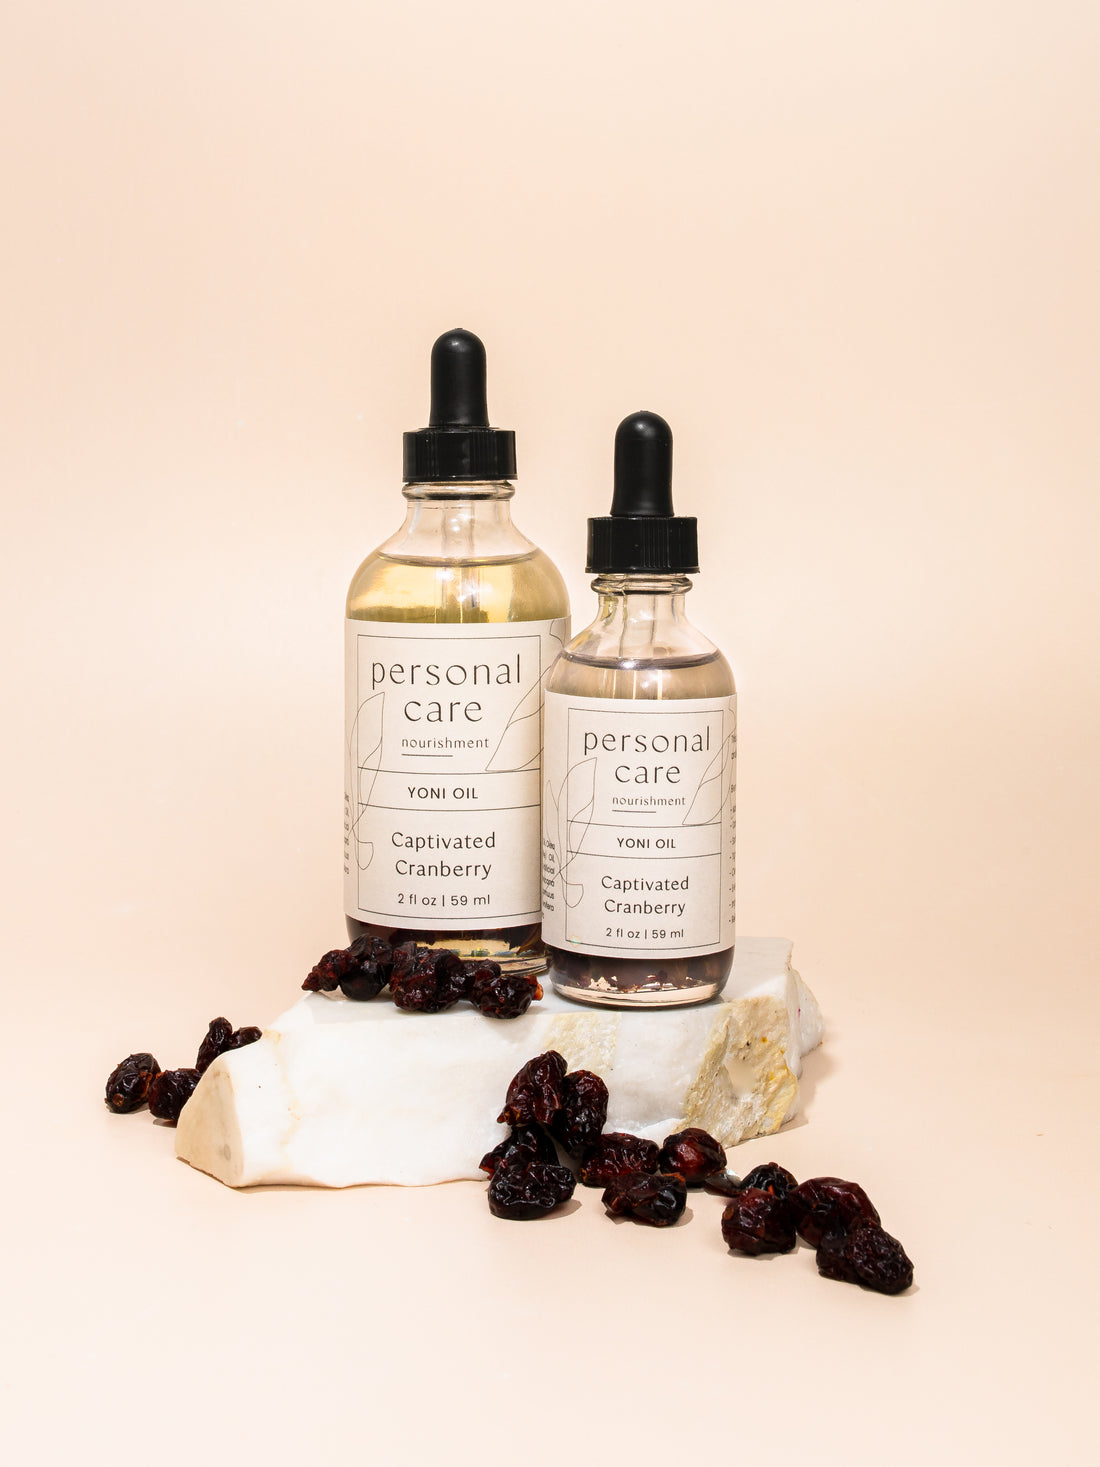 Captivated Cranberry YONI Oil